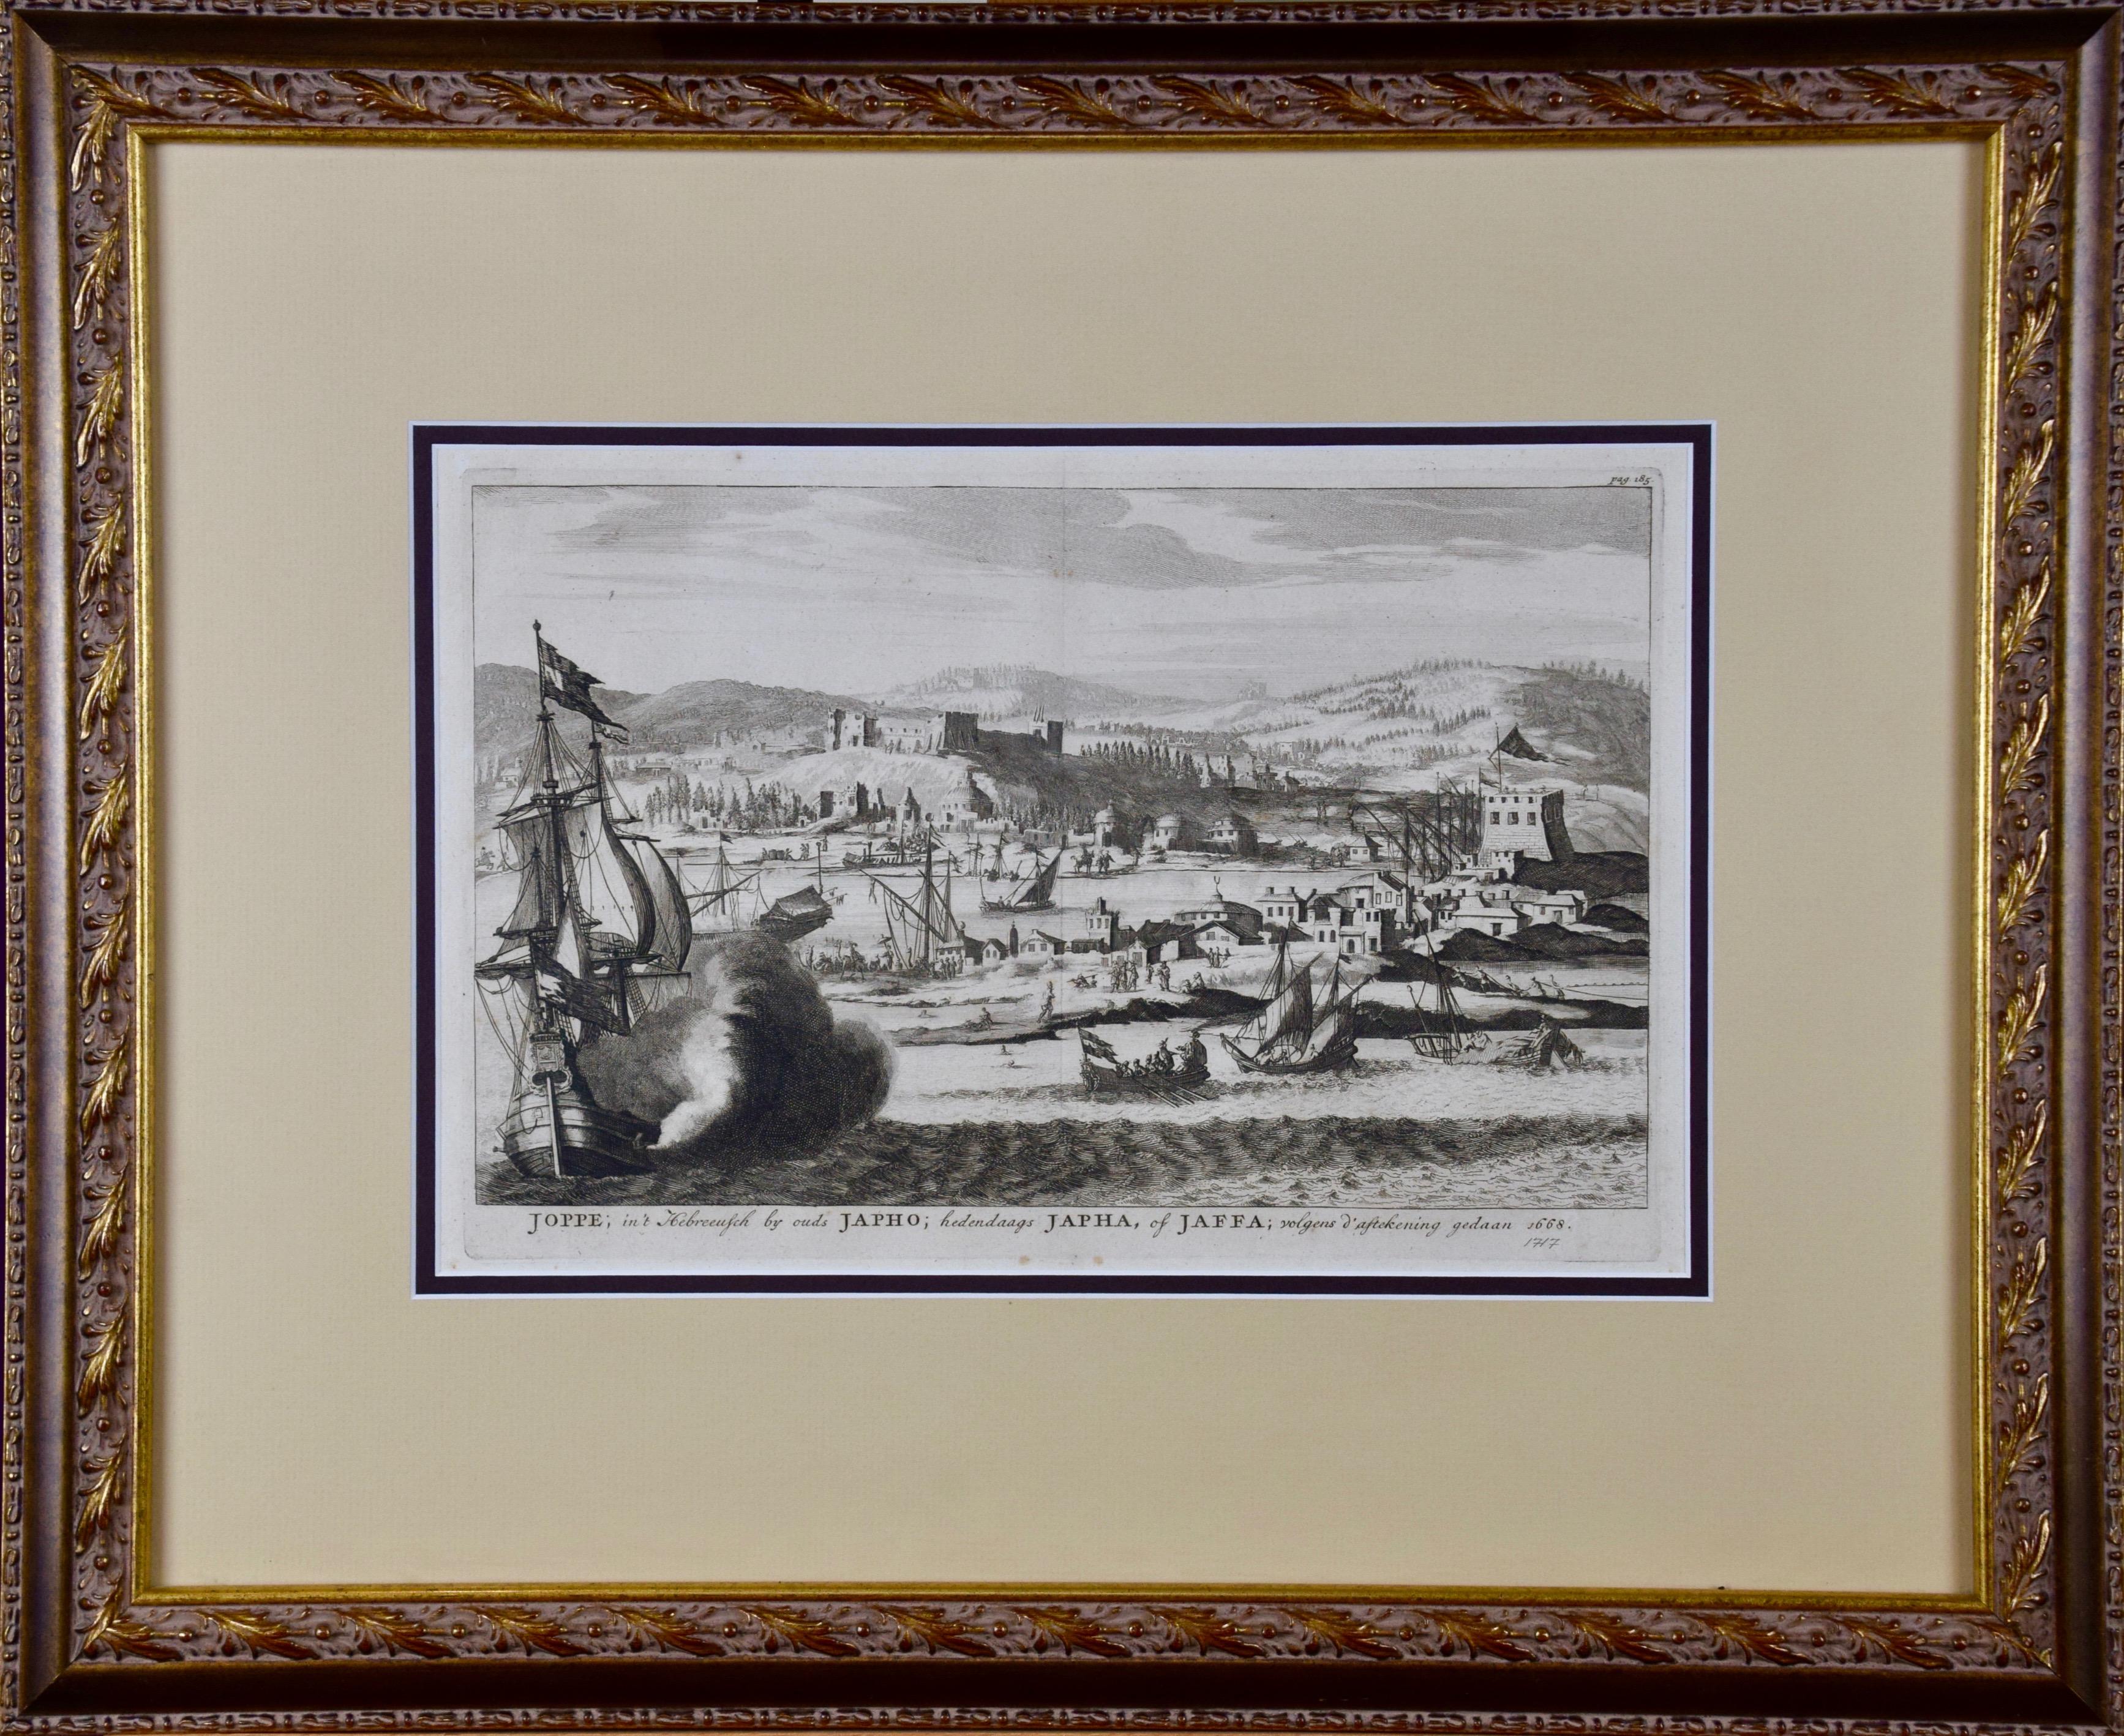 18th Century French Map and City View of Joppe/Jaffa (Tel Aviv) by Sanson - Print by Nicholas Sanson d'Abbeville